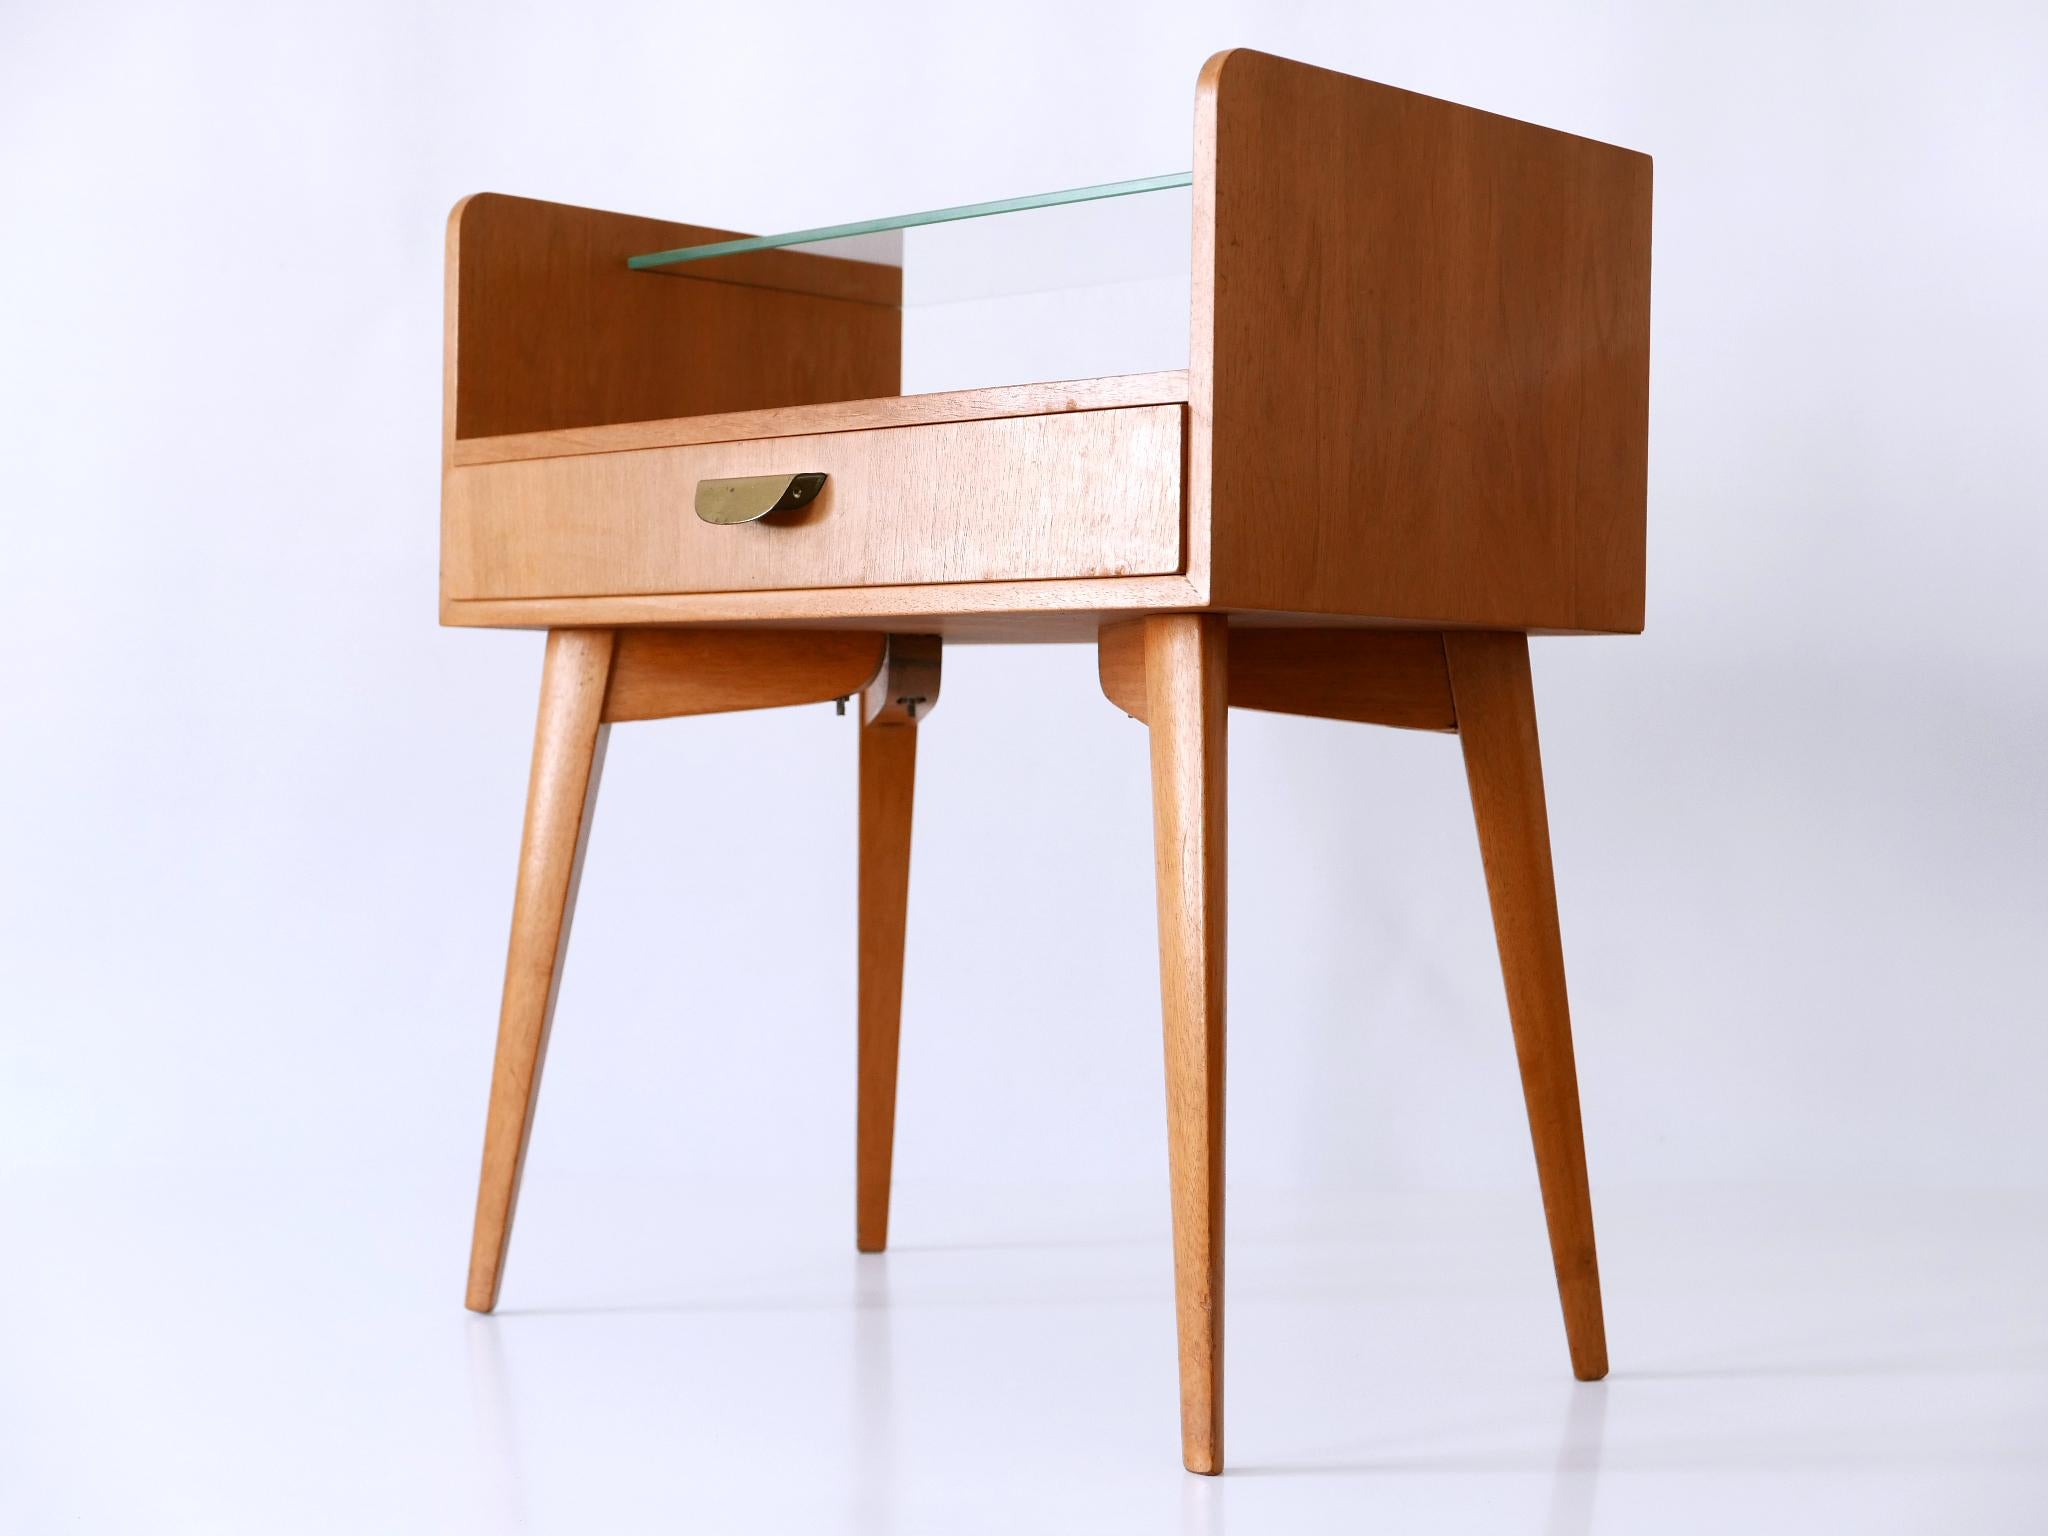 Set of Two Mid Century Modern Walnut Nightstands by WK Möbel Germany 1950s For Sale 2